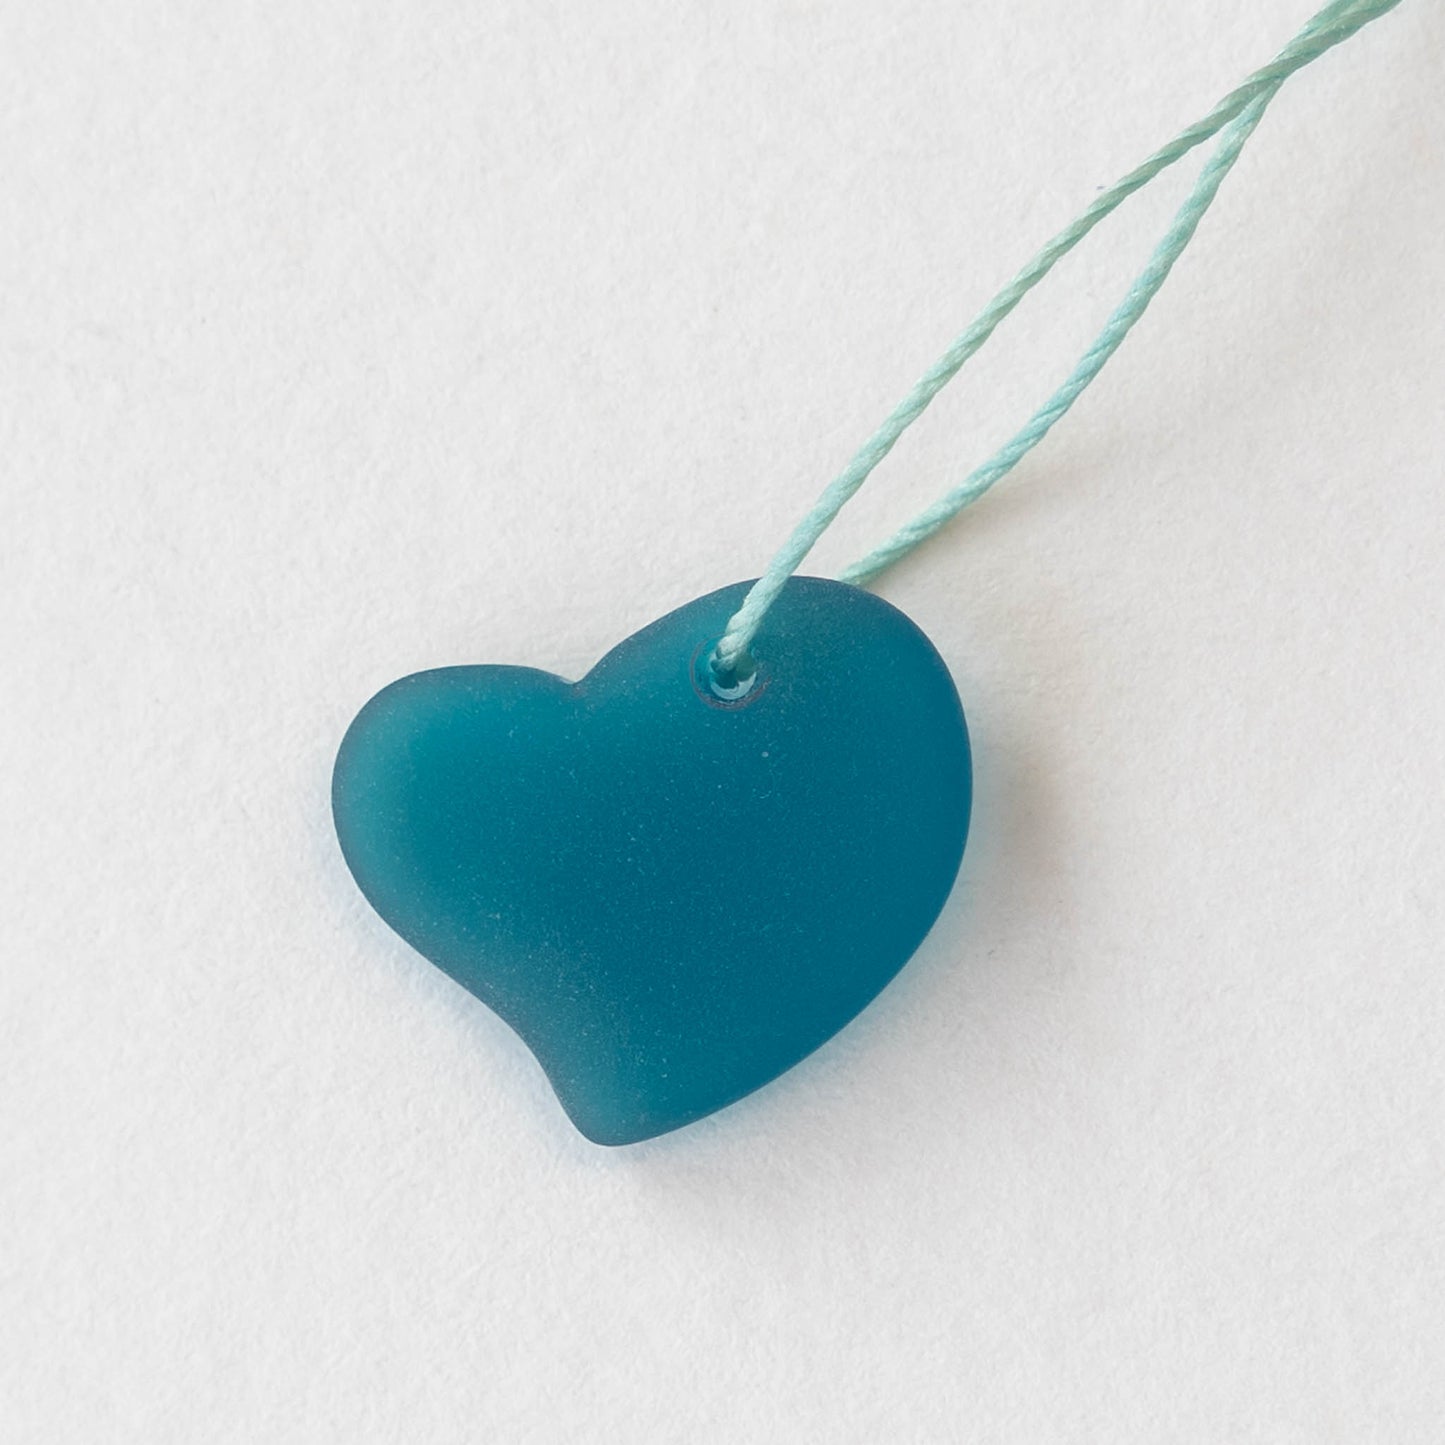 18mm Frosted Glass Hearts - Teal - 2 Beads